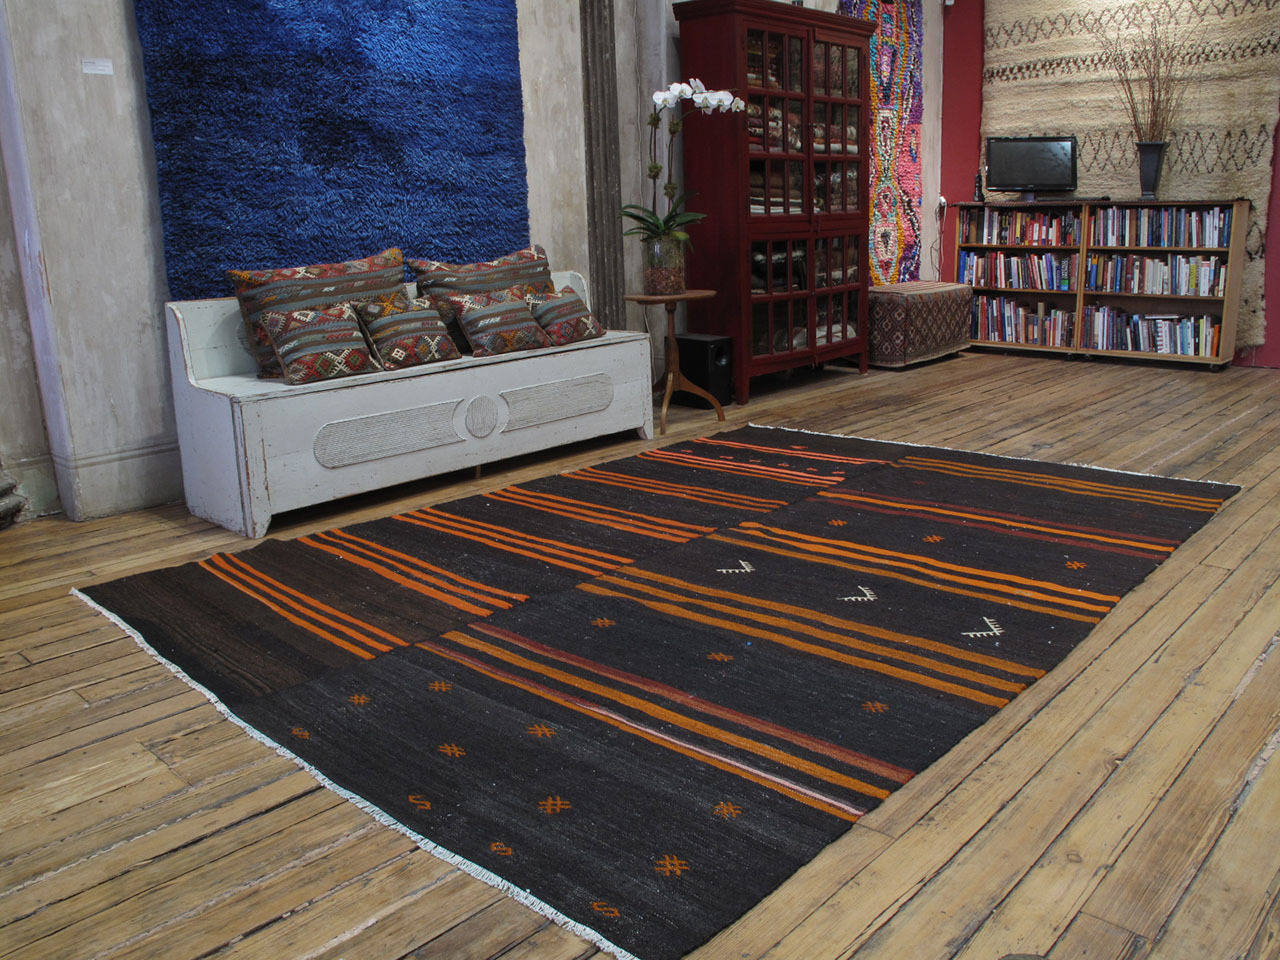 A rather Primitive tribal flat-weave from Southeastern Turkey, woven with goat hair, in two asymmetrical panels. Woven as a hard-wearing, everyday floor cover, it is quite appealing due to its authentic simplicity.